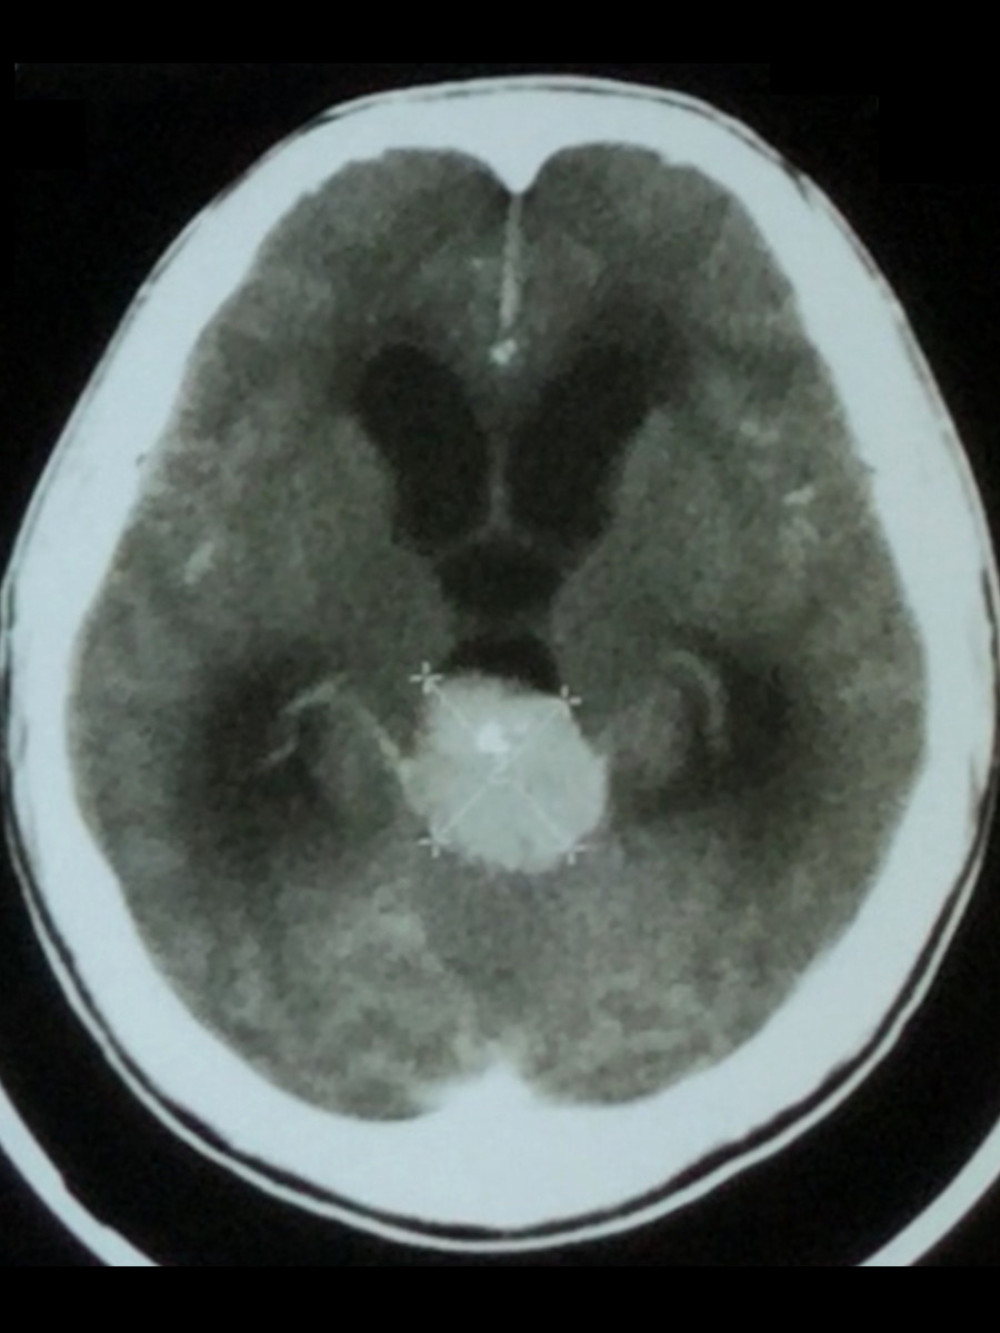 Computed tomography of brain, coronal section with contrast, 25 years prior to presentation. A 3.2×3.7-centimeter soft-tissue mass lesion with a central focus of calcification is noted in the pineal region. The mass bulges into the posterior aspect of the 3rd ventricle, resulting in obstructive hydrocephalus with moderate-to-severe dilation of the 3rd and lateral ventricles. The lesion homogenously enhanced with contrast.